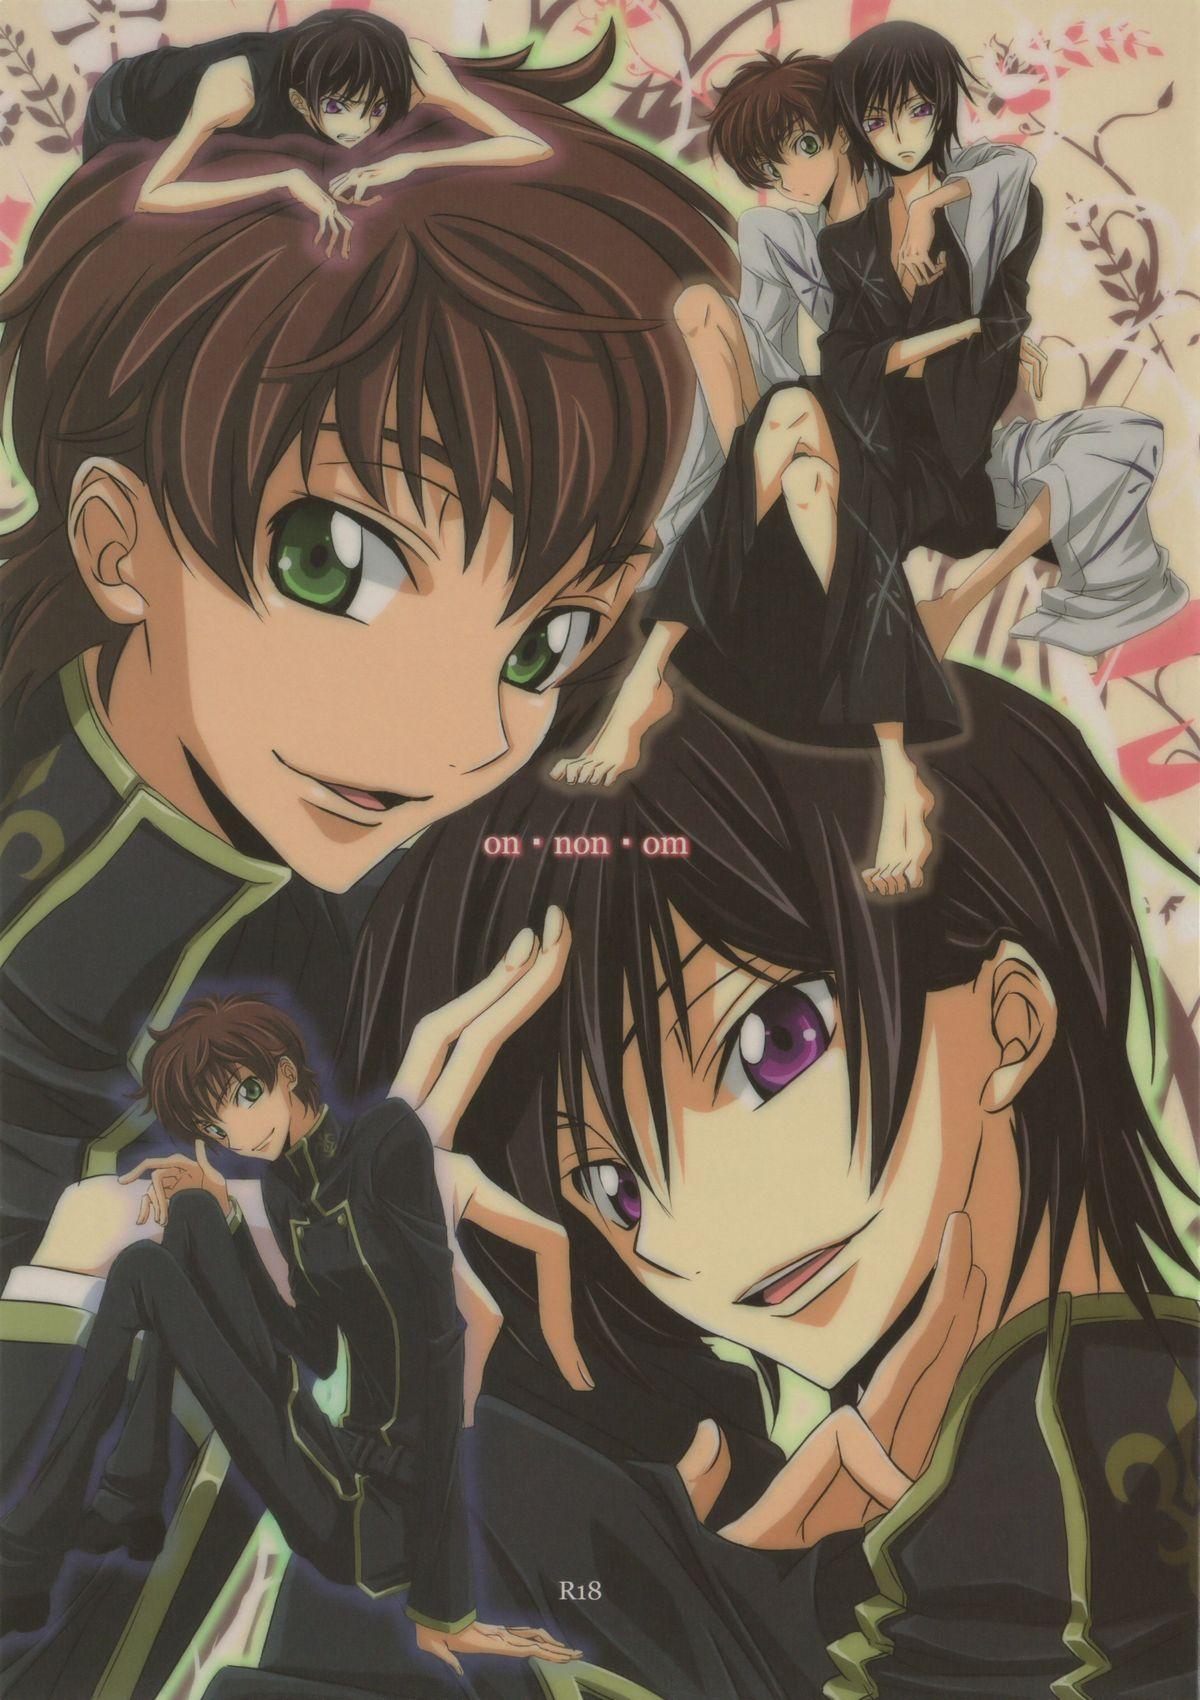 Dyke on・non・om - Code geass Booty - Picture 1